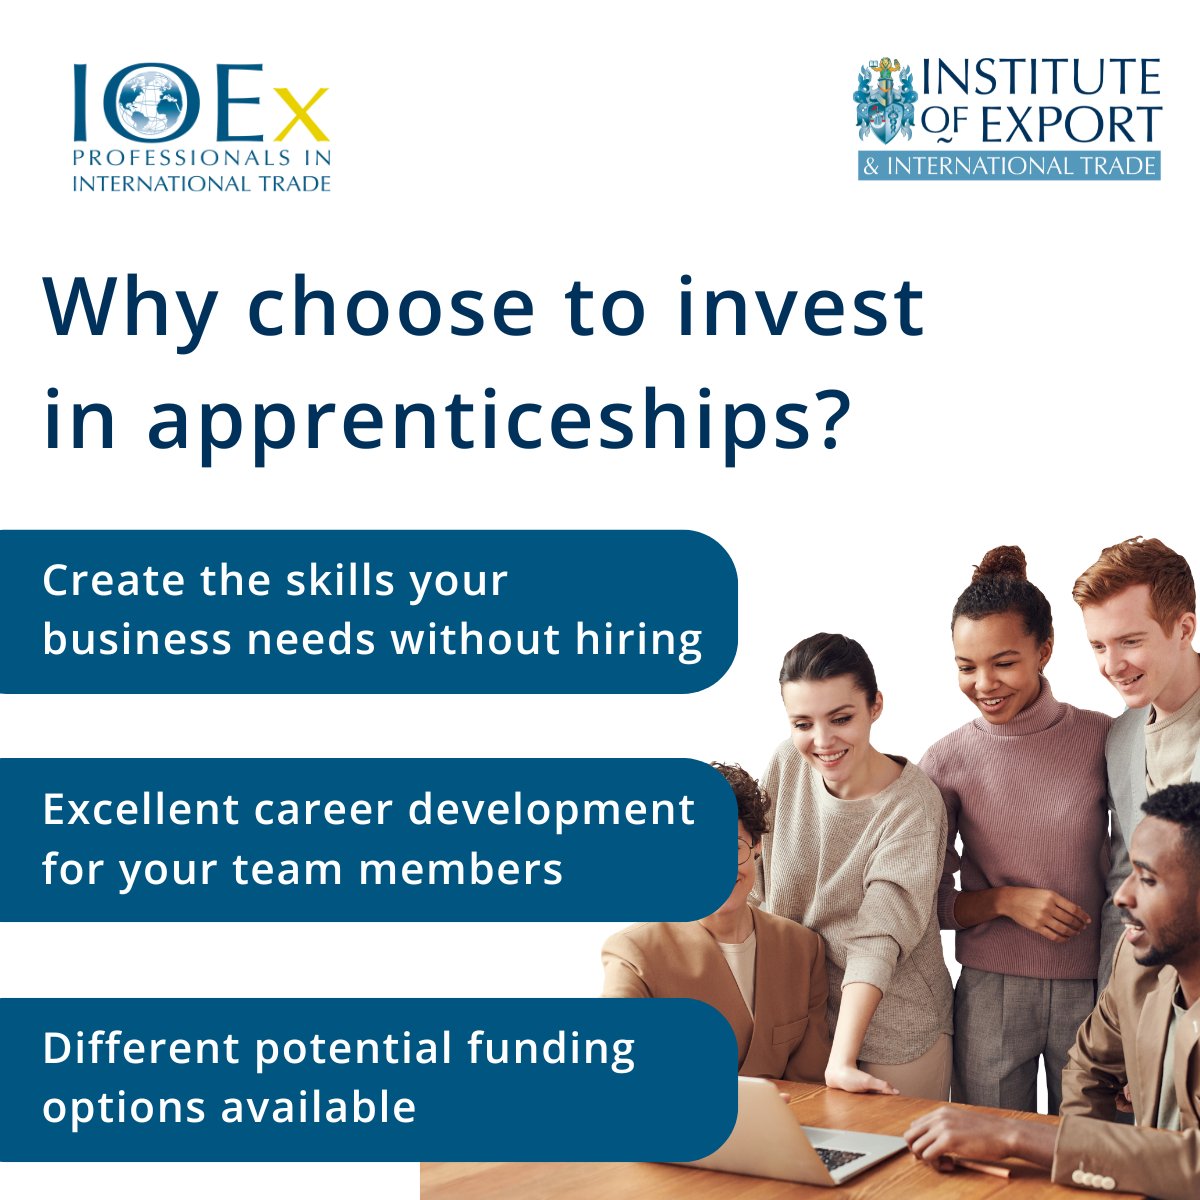 Why invest in #apprenticeships with IOEx Ltd? ✅ #Upskill your #business from within without hiring ✅ Excellent #career development for your team members ✅ Different potential funding options available Find out more 👉ow.ly/lgT450RXVlQ